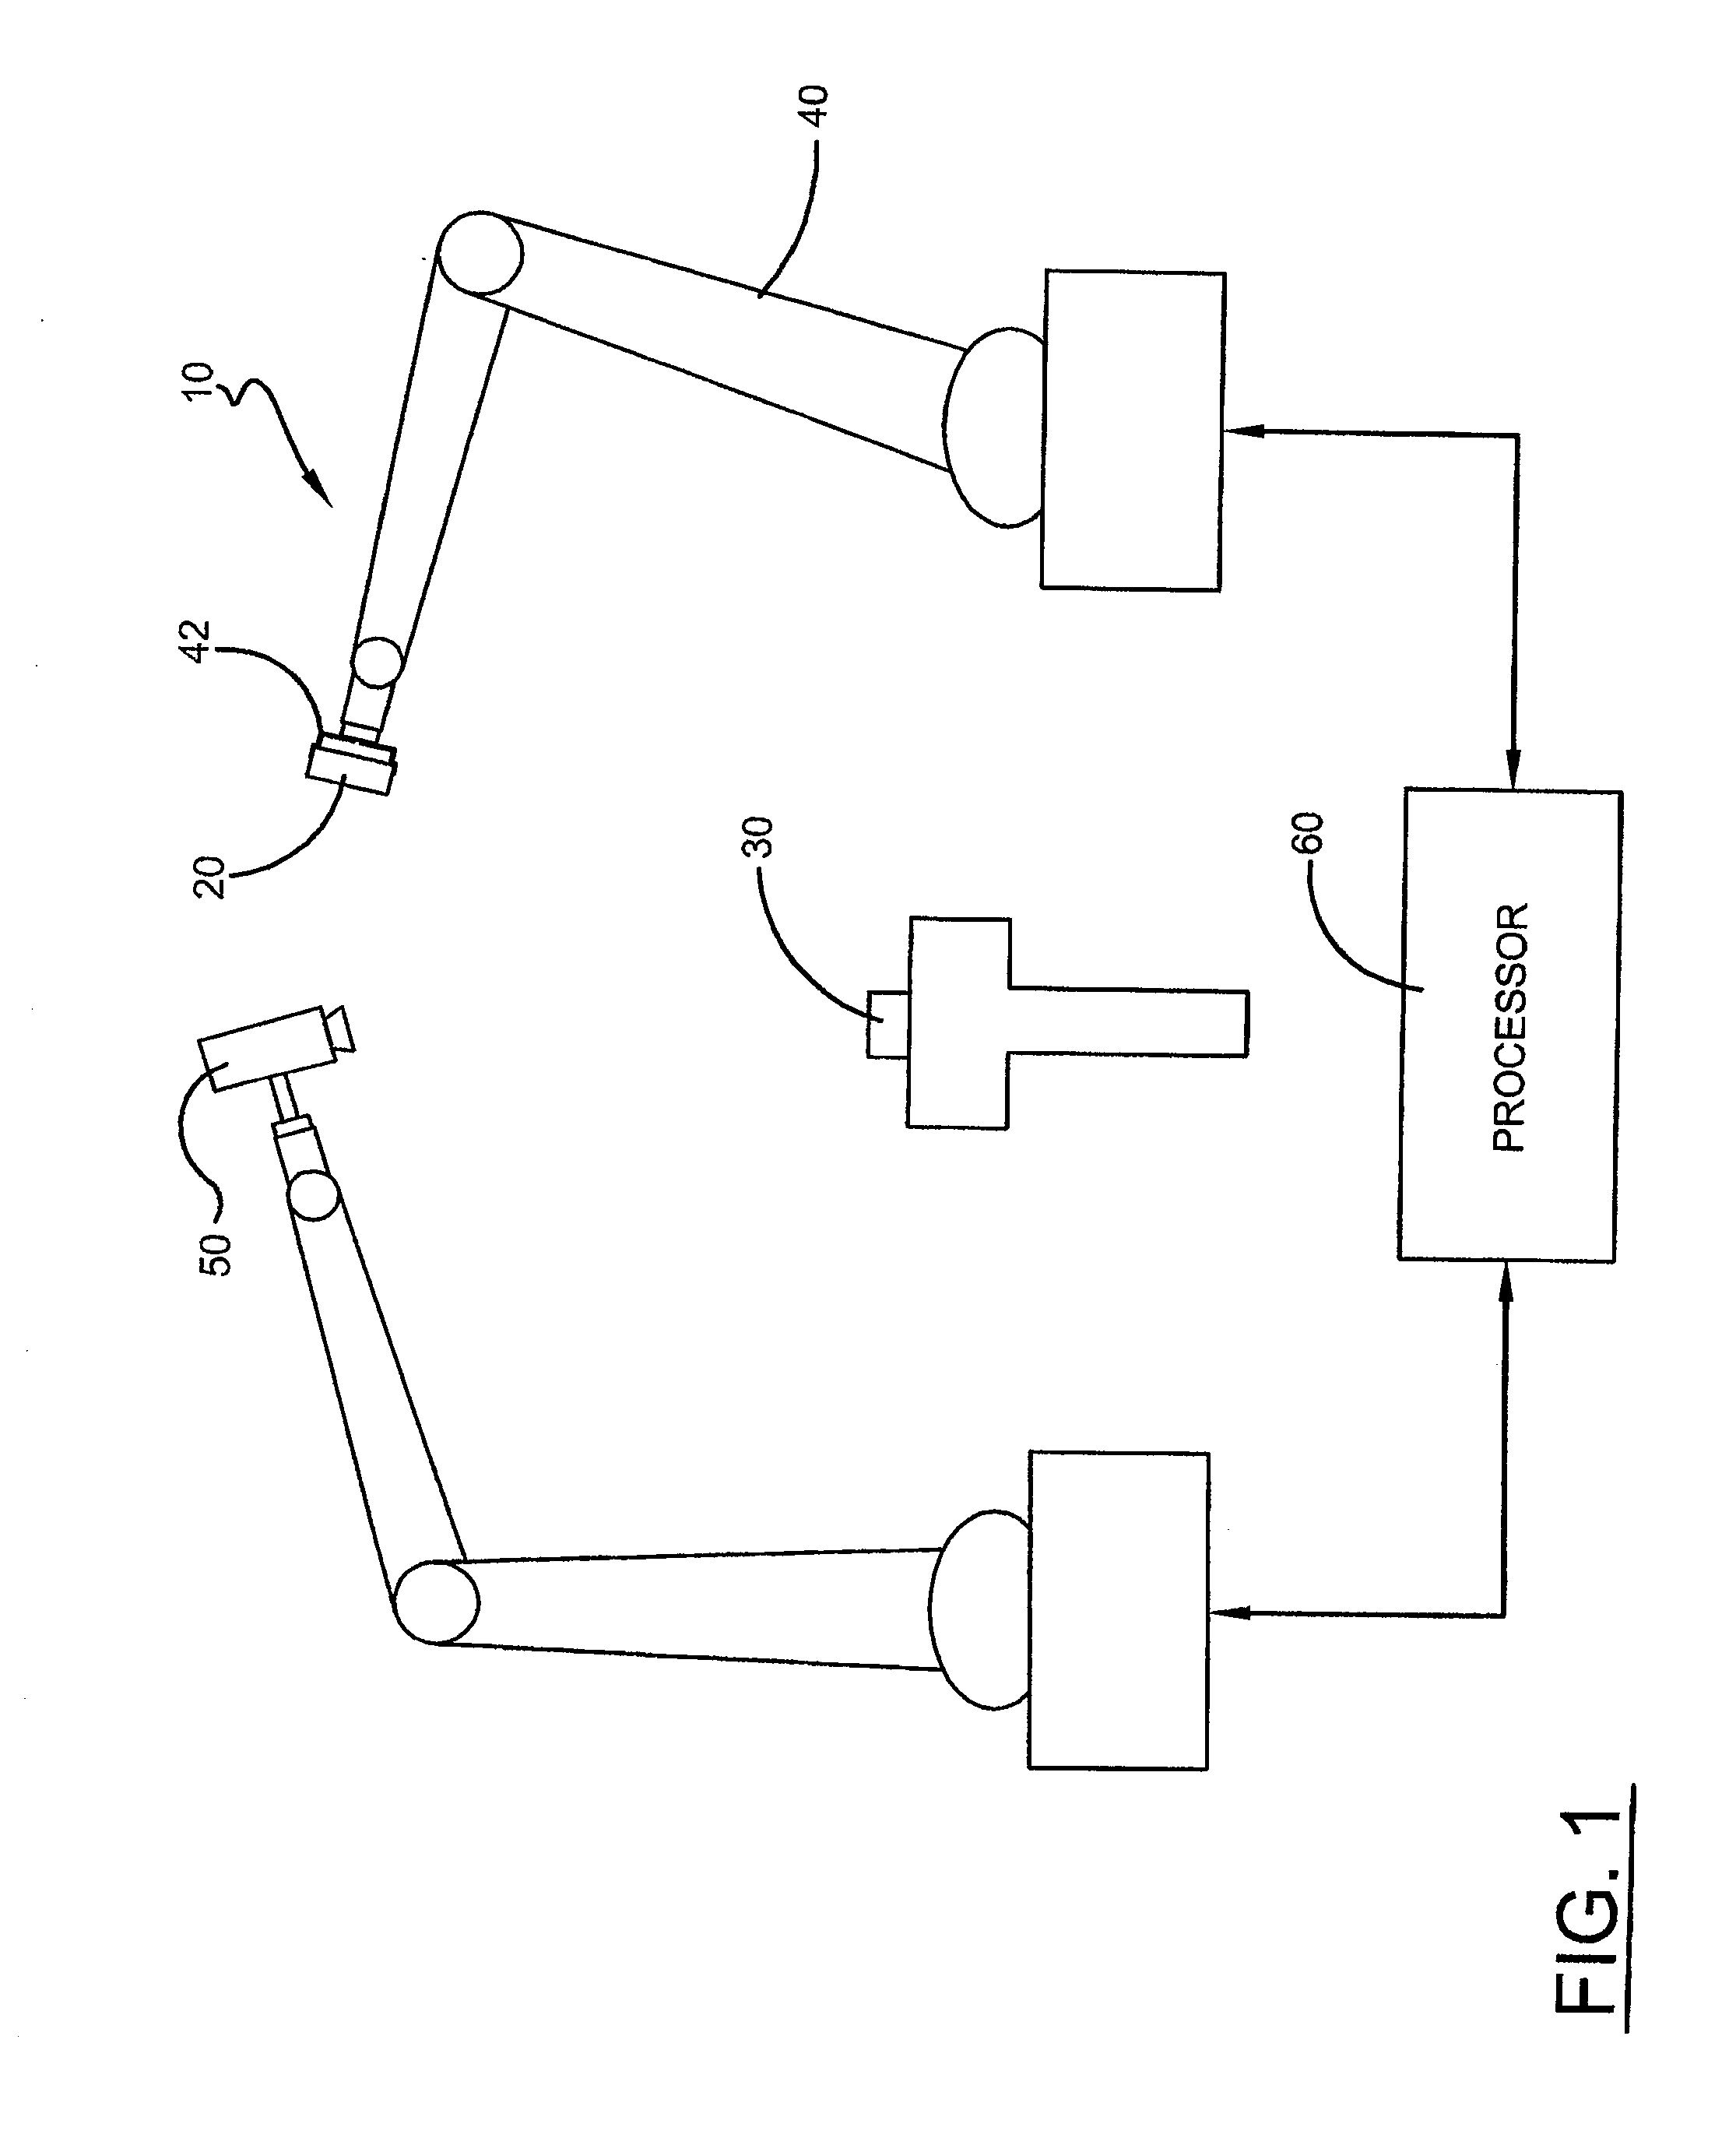 Vision-guided alignment system and method